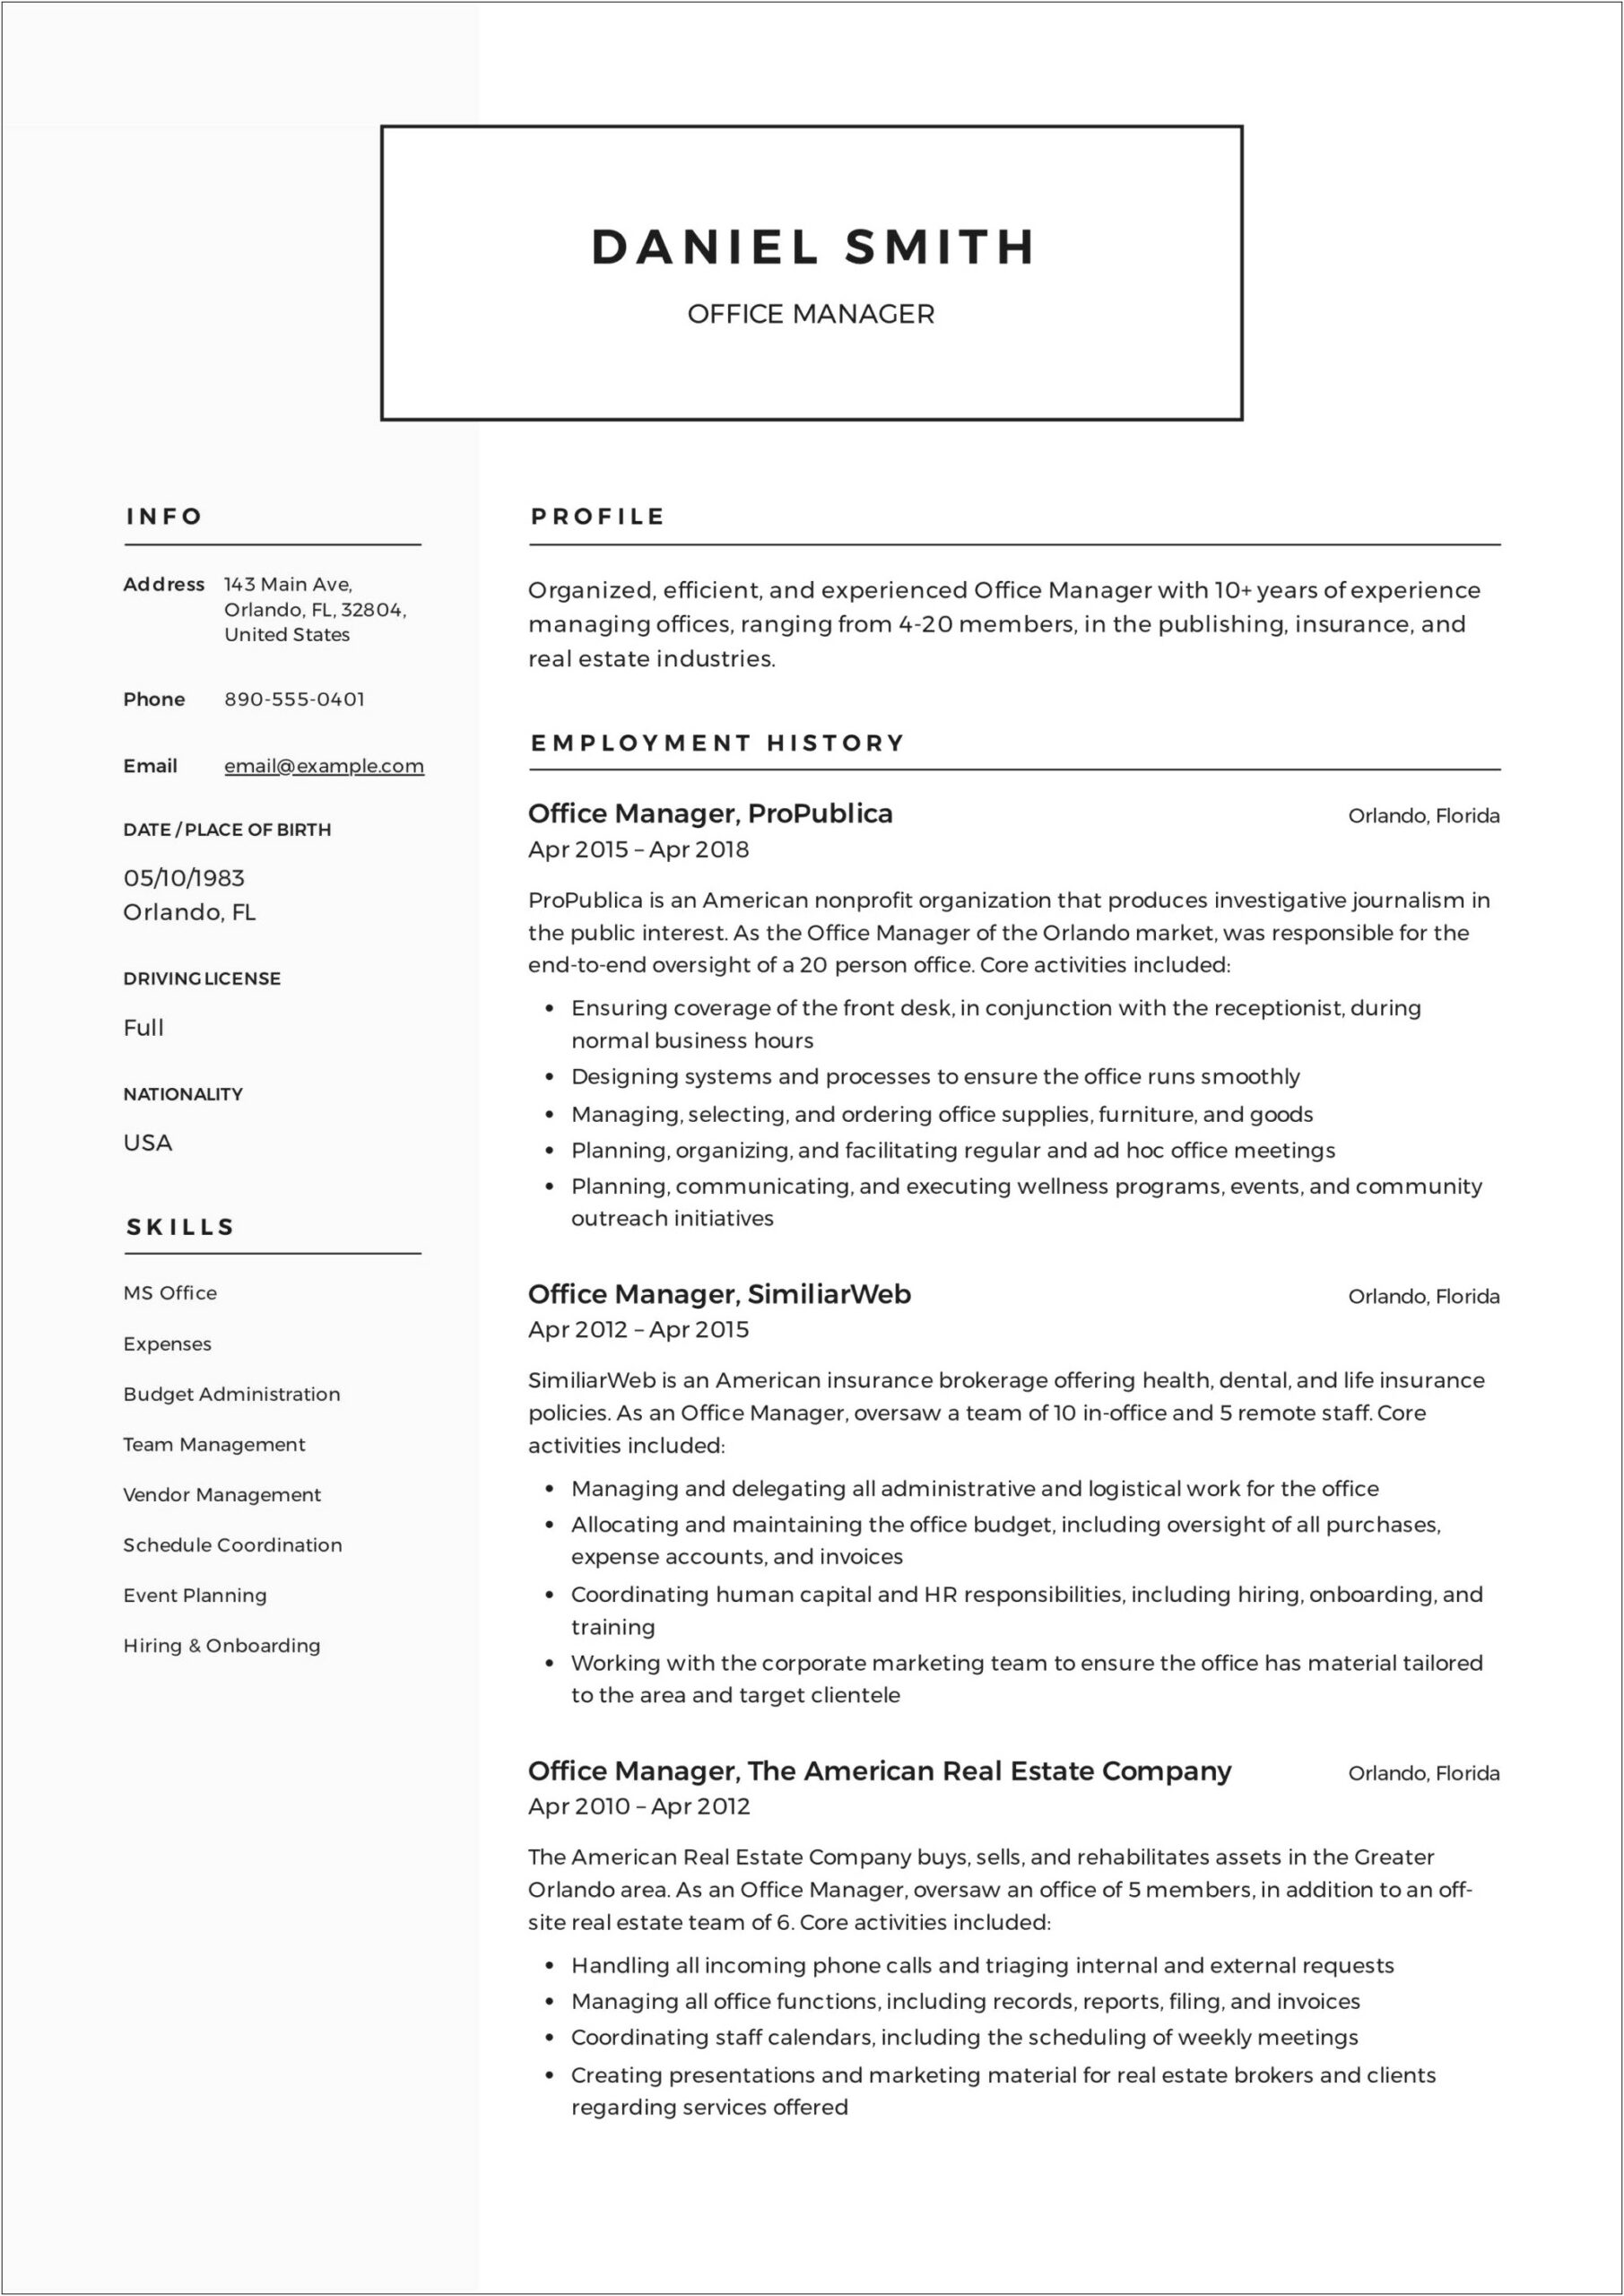 Home Health Scheduling Manager Resume Samples